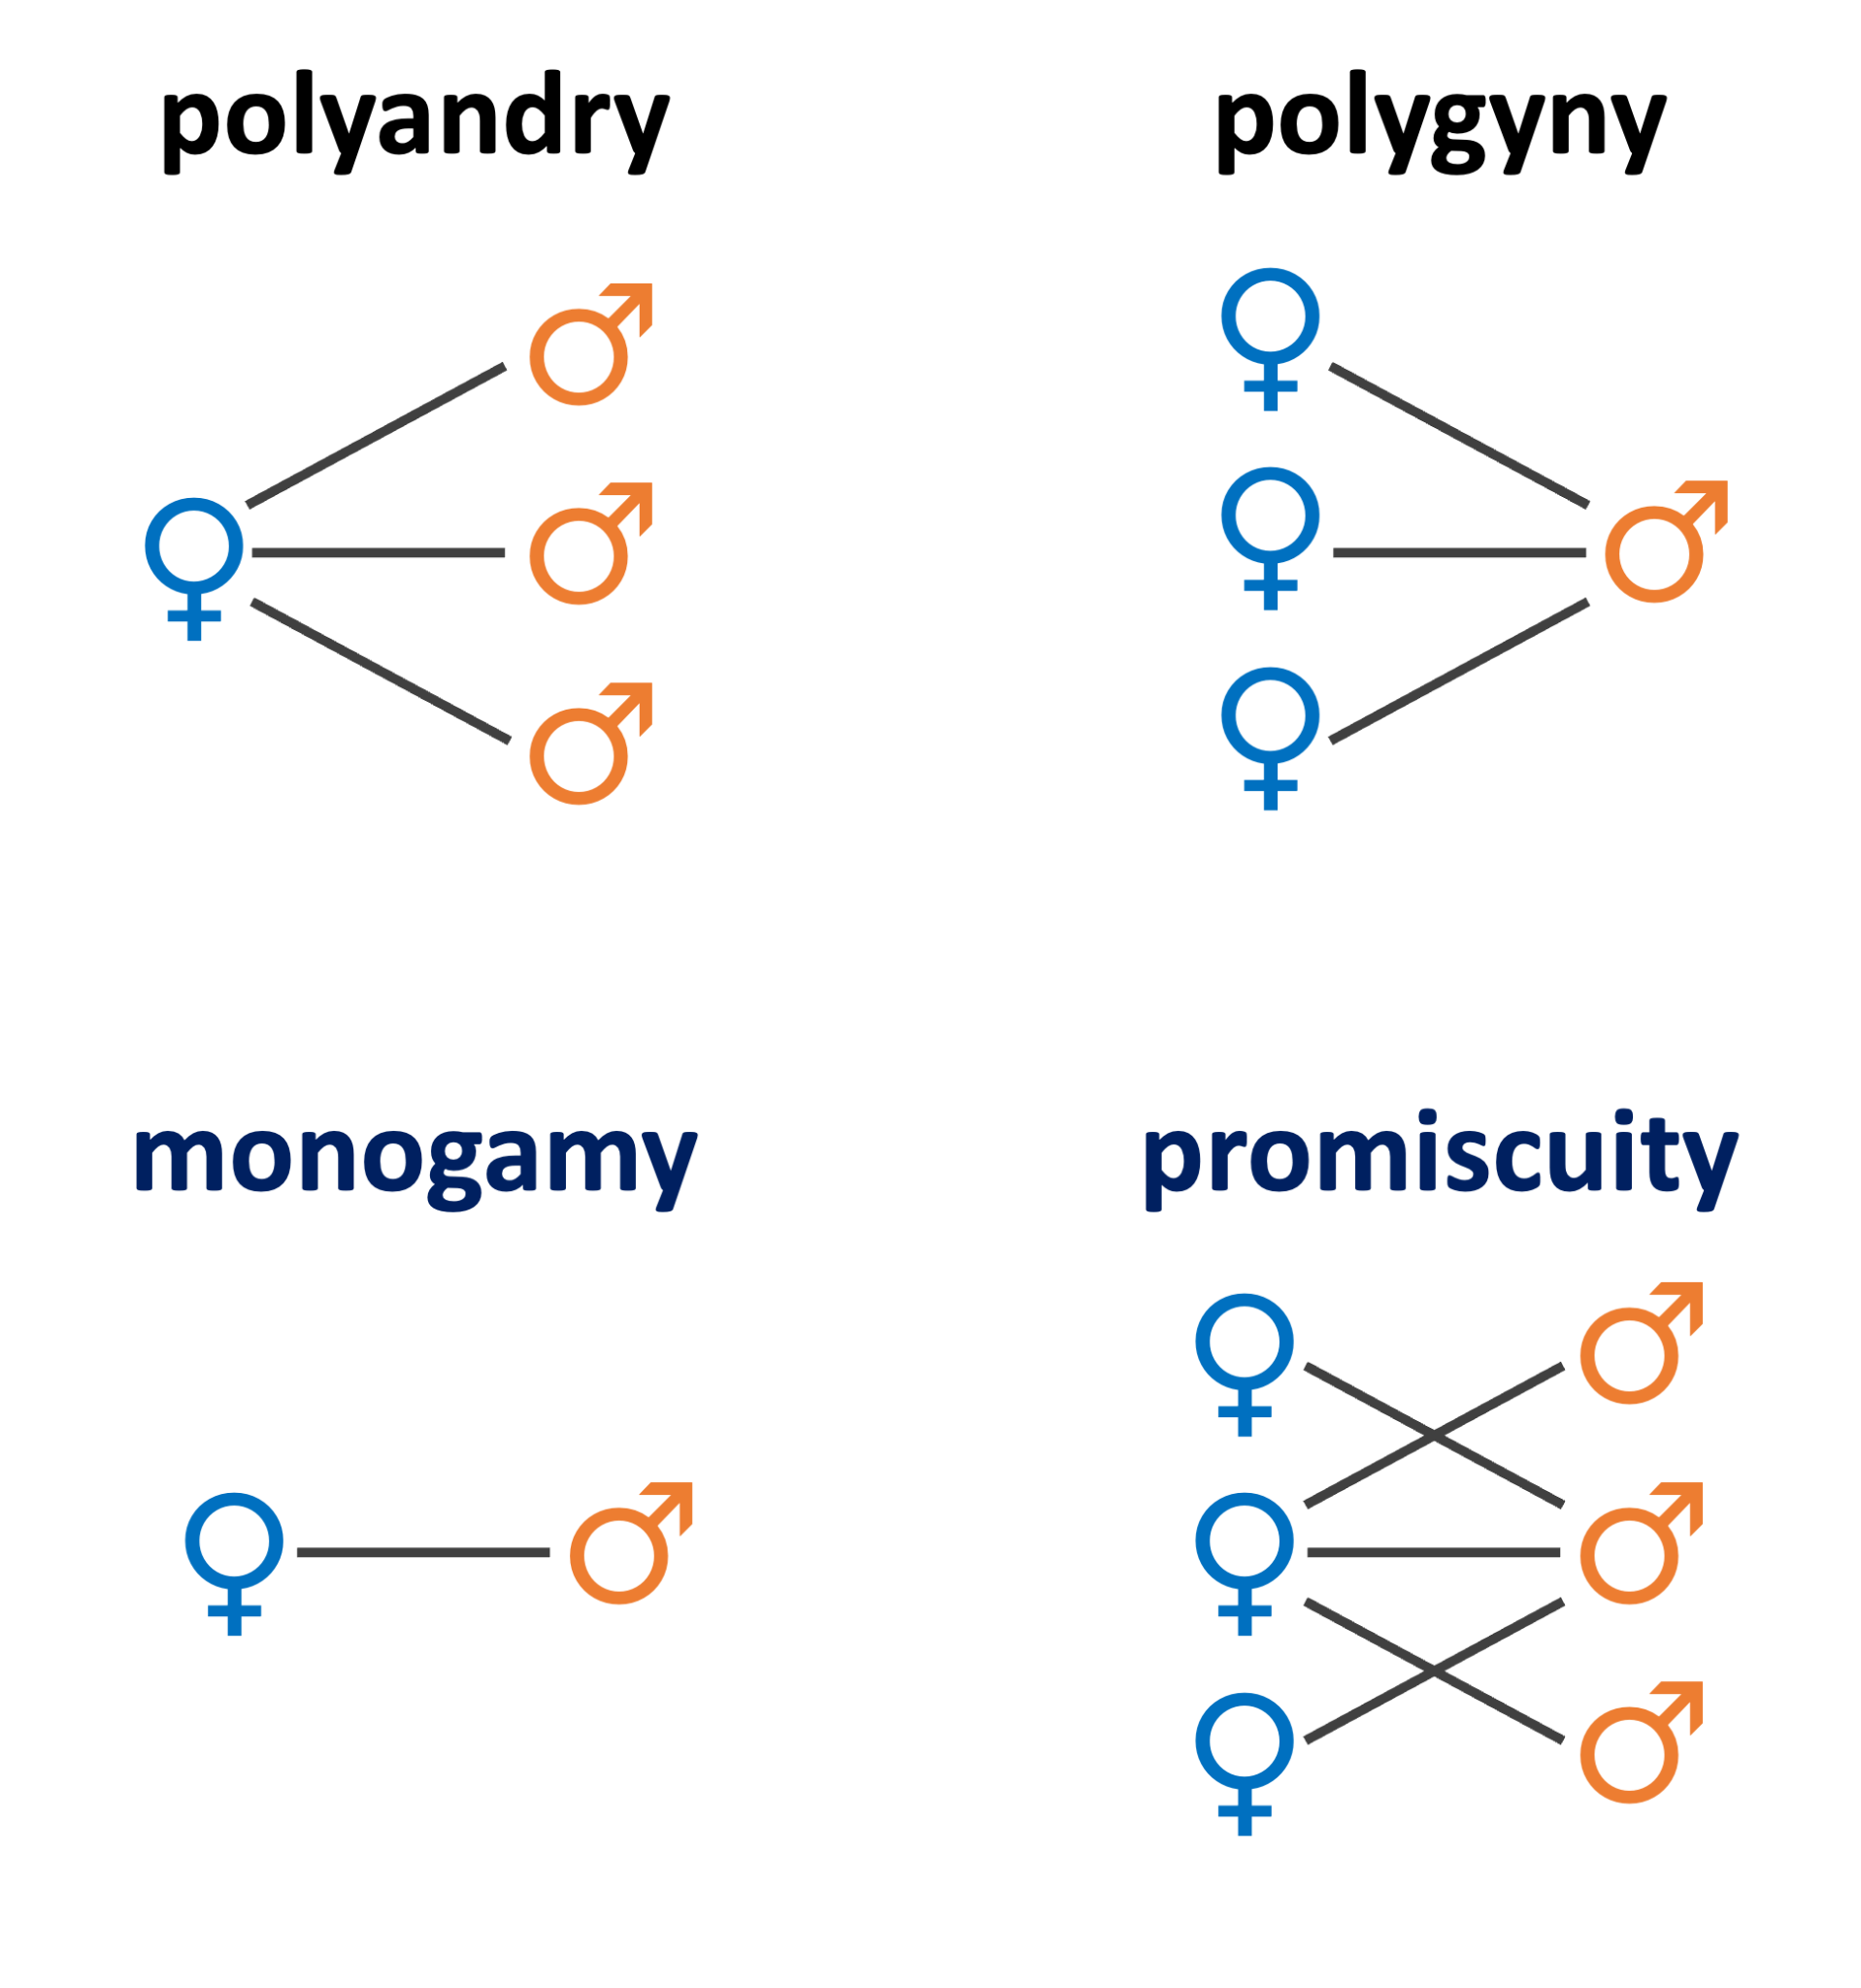 Four diagrams describing polyandry, polygyny, monogamy, and promiscuity.